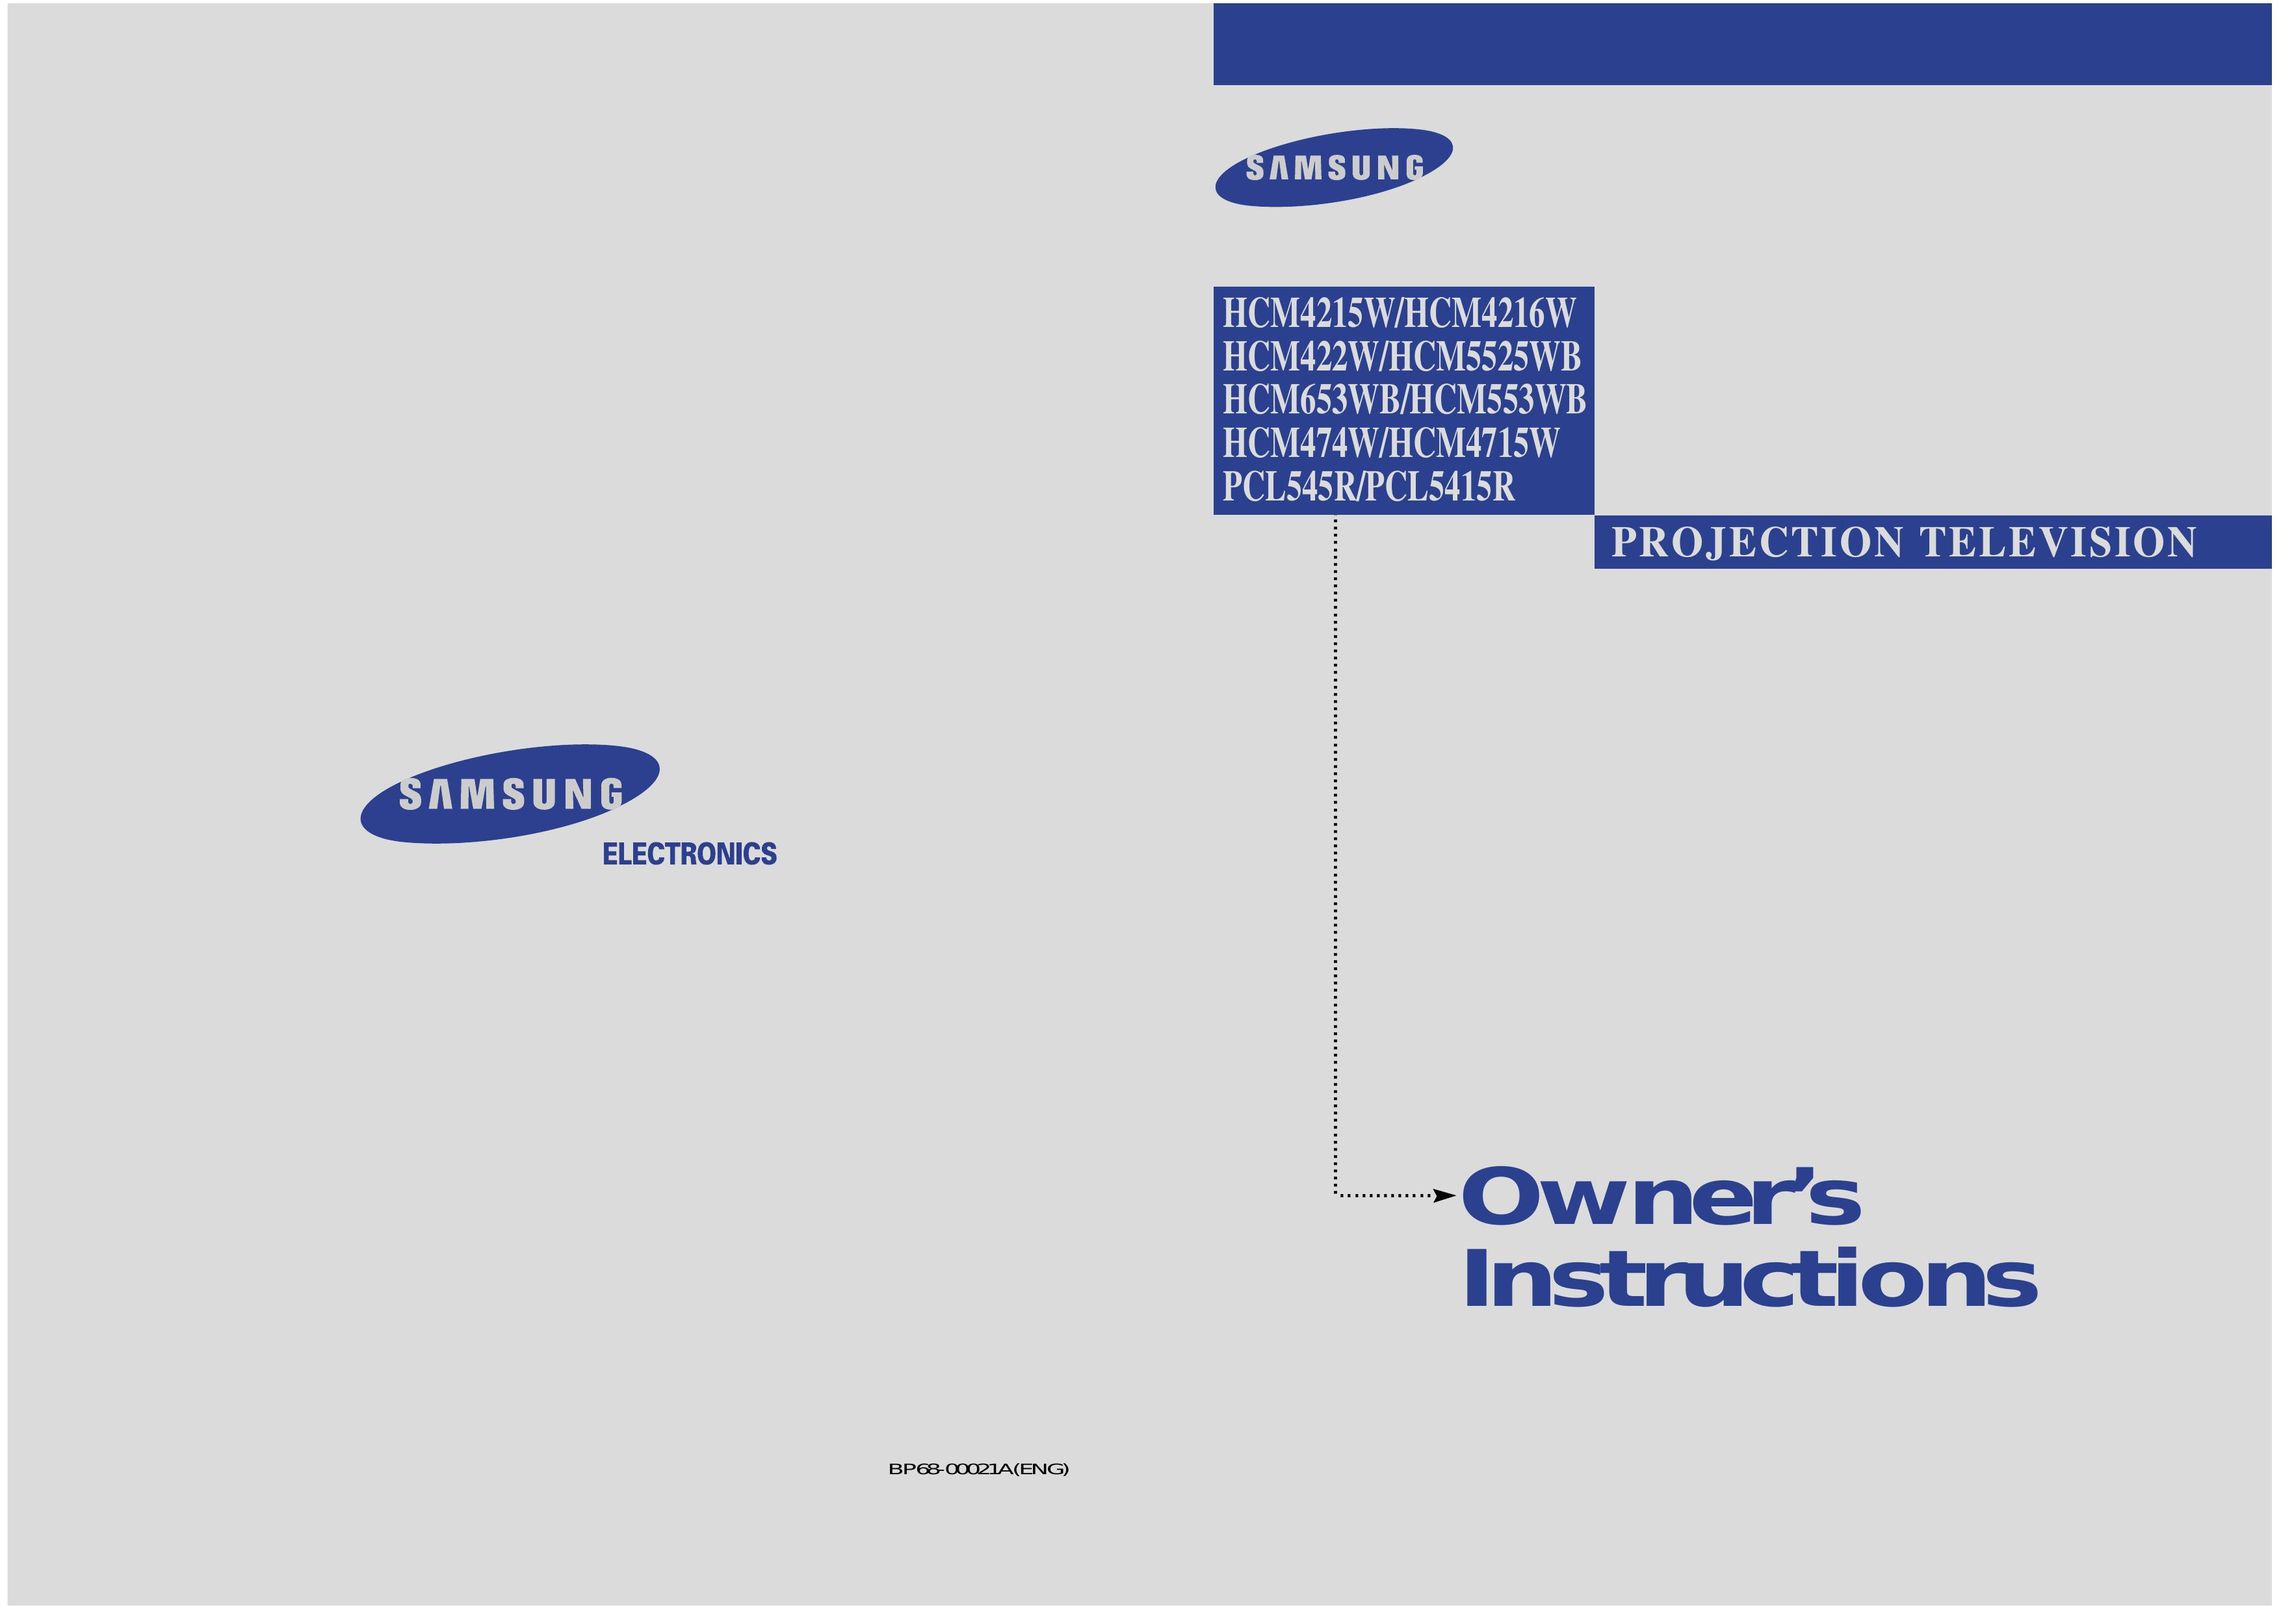 Samsung HCM5525WB Projection Television User Manual